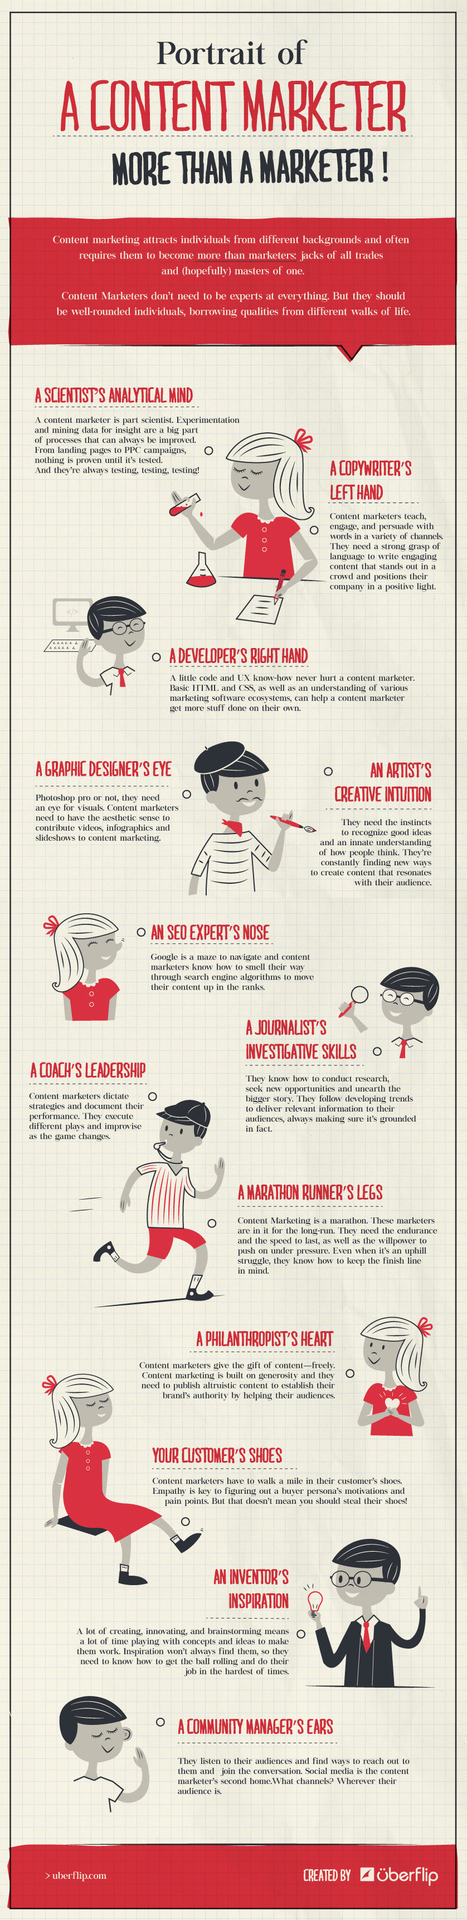 #Infographic: Portrait of a Content Marketer: More Than a Writer | 21st Century Learning and Teaching | Scoop.it